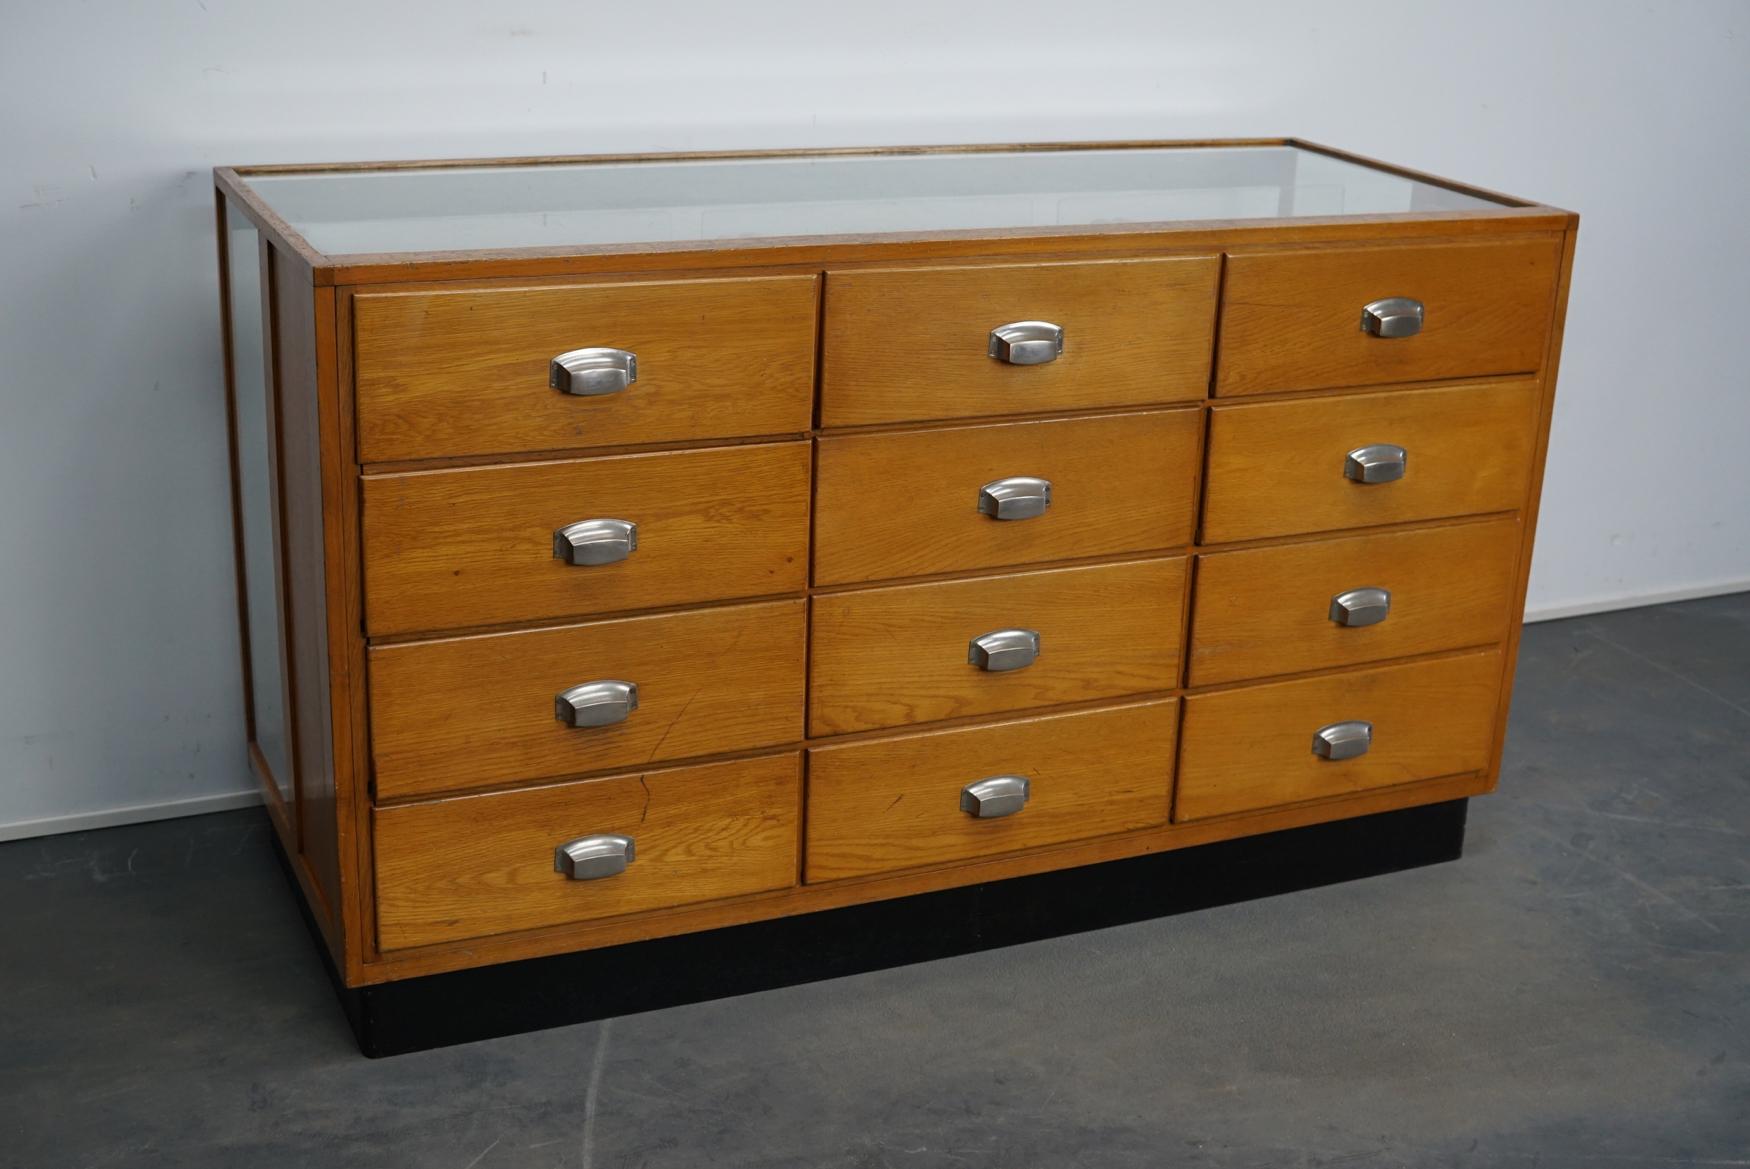 This shop counter was made and manufactured during the 1950s in Germany. It features an oak frame with oak drawers with metal cup handles and a glass casing. It remains in a good vintage condition with some marks consistent with age and use.